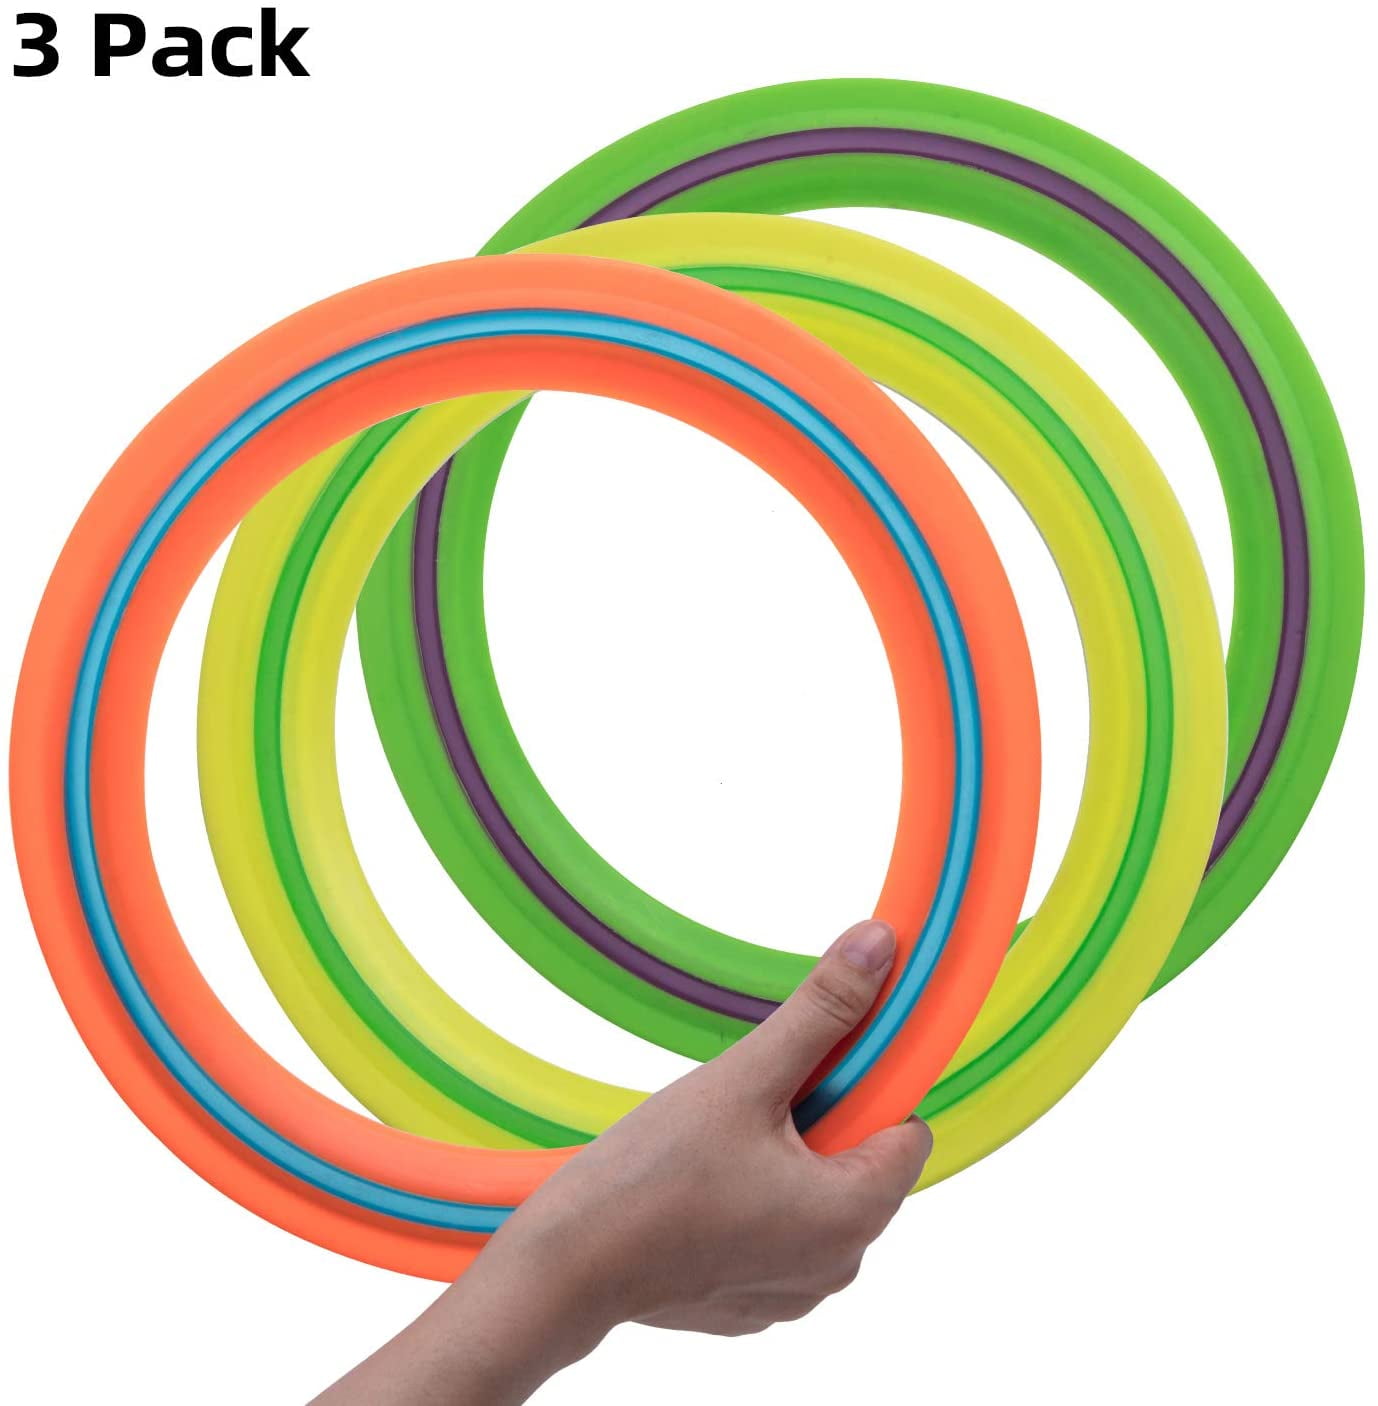 10" Flying Ring Disc Frisbee Flyer Adult Kids Family Outdoor Play Toy 